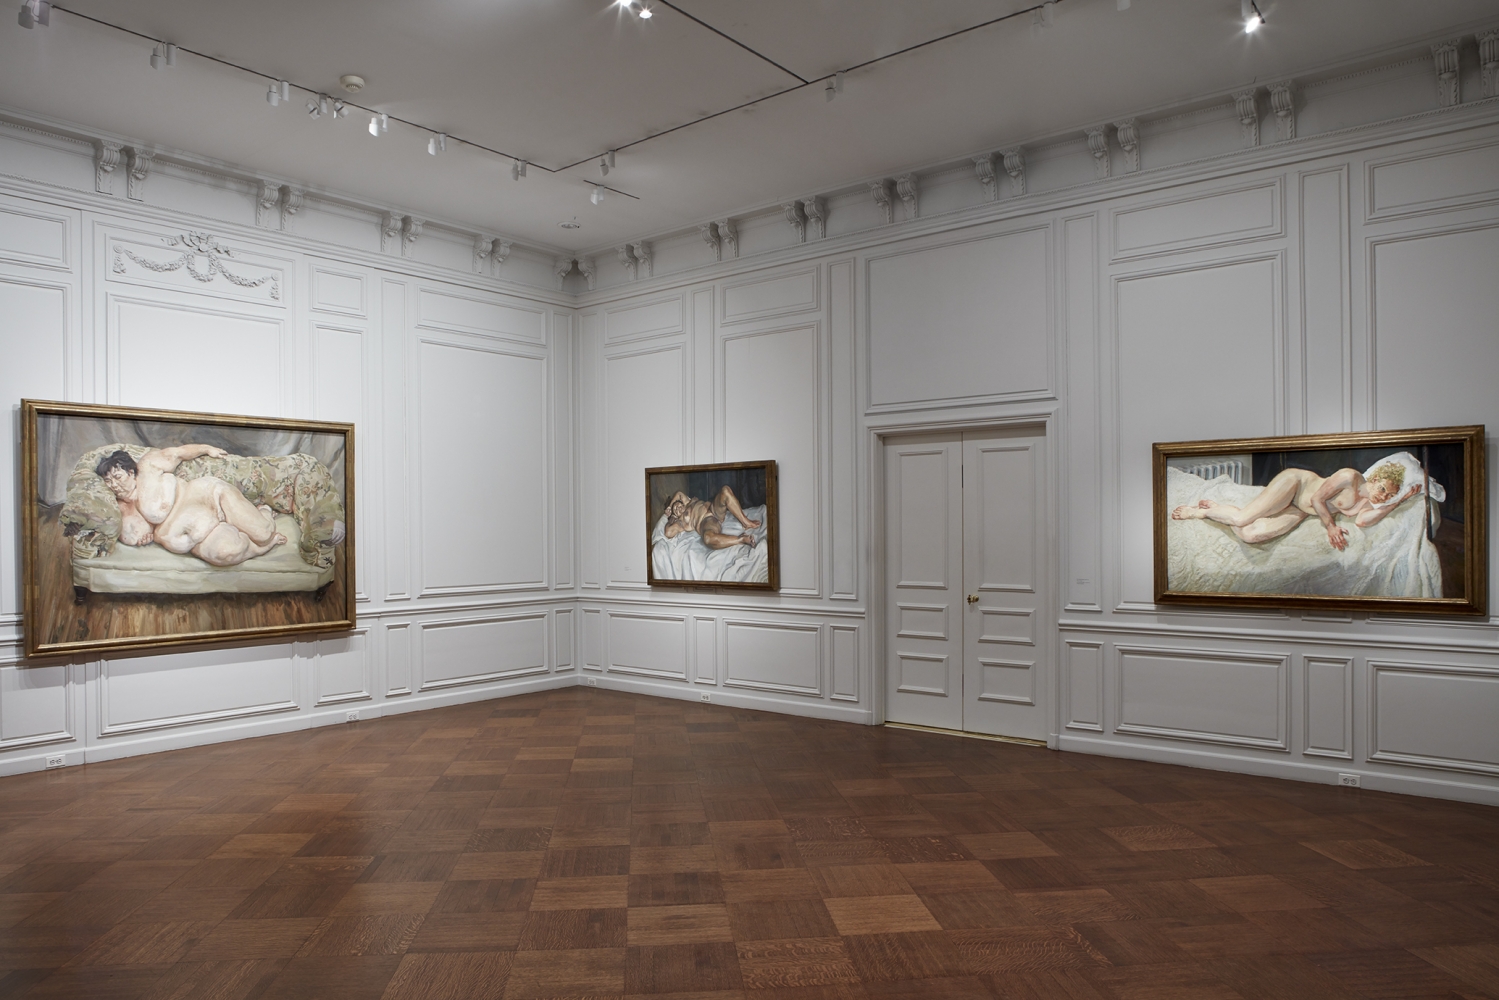 Installation view of&nbsp;Lucian Freud: Monumental&nbsp;at Acquavella Galleries from April 5&ndash;May 24, 2019.&nbsp;Left to right:&nbsp;Benefits Supervisor Sleeping,&nbsp;1995, Lent by&nbsp;Private Collection;&nbsp;Naked Solicitor,&nbsp;2003, Lent by&nbsp;Private Collection;&nbsp;Ria, Naked Portrait,&nbsp;2006-07, Lent by&nbsp;Private Collection.&nbsp;Photo by Kent Pell. Art&nbsp;&copy; The Lucian Freud Archive / Bridgeman Images.